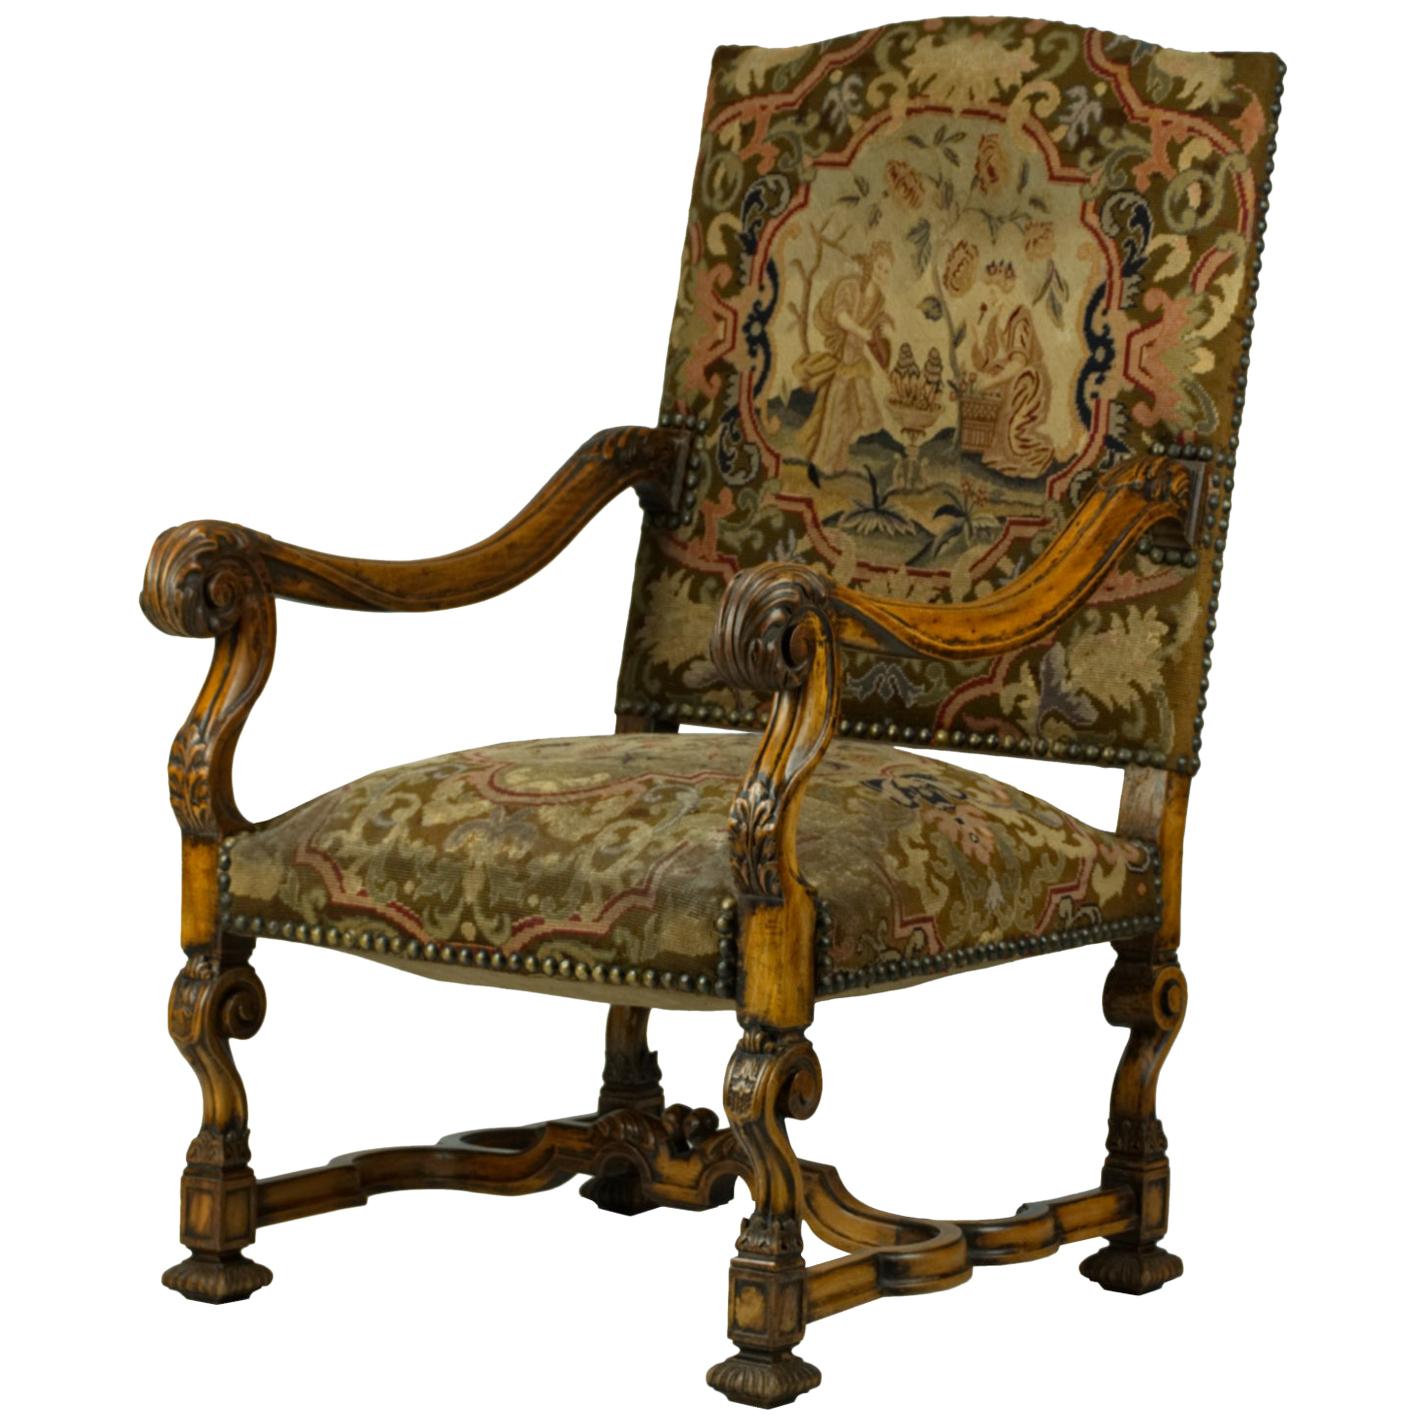 Antique Hand Carved Louis XIV Needlepoint Tapestry Highback Armchair, circa 1850